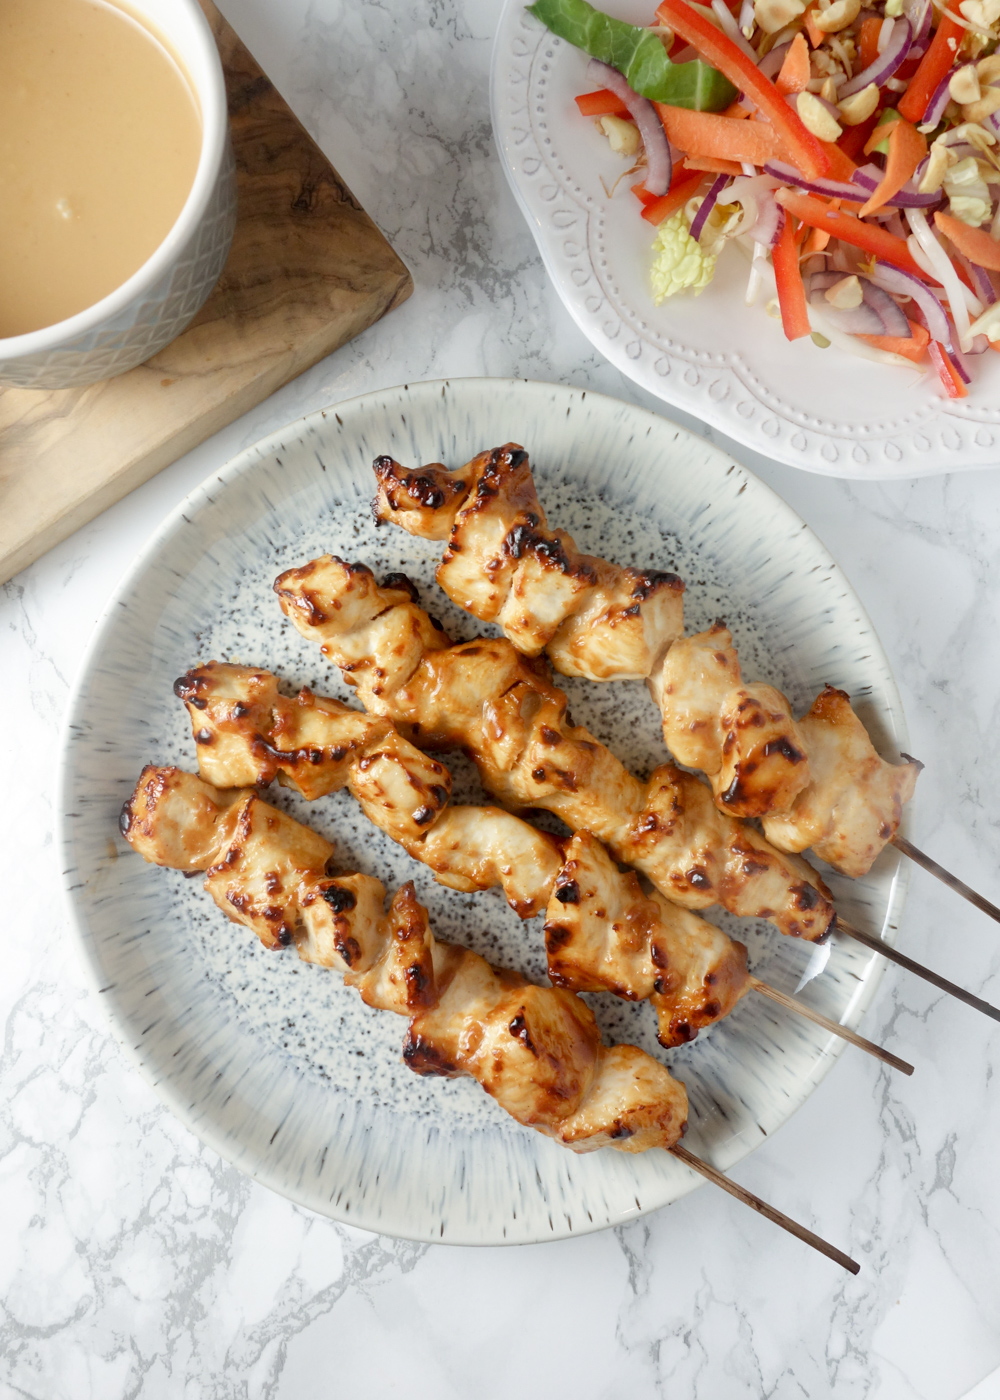 A quick & easy recipe for chicken satay skewers with a creamy, nutty peanut dipping sauce. SO tasty!